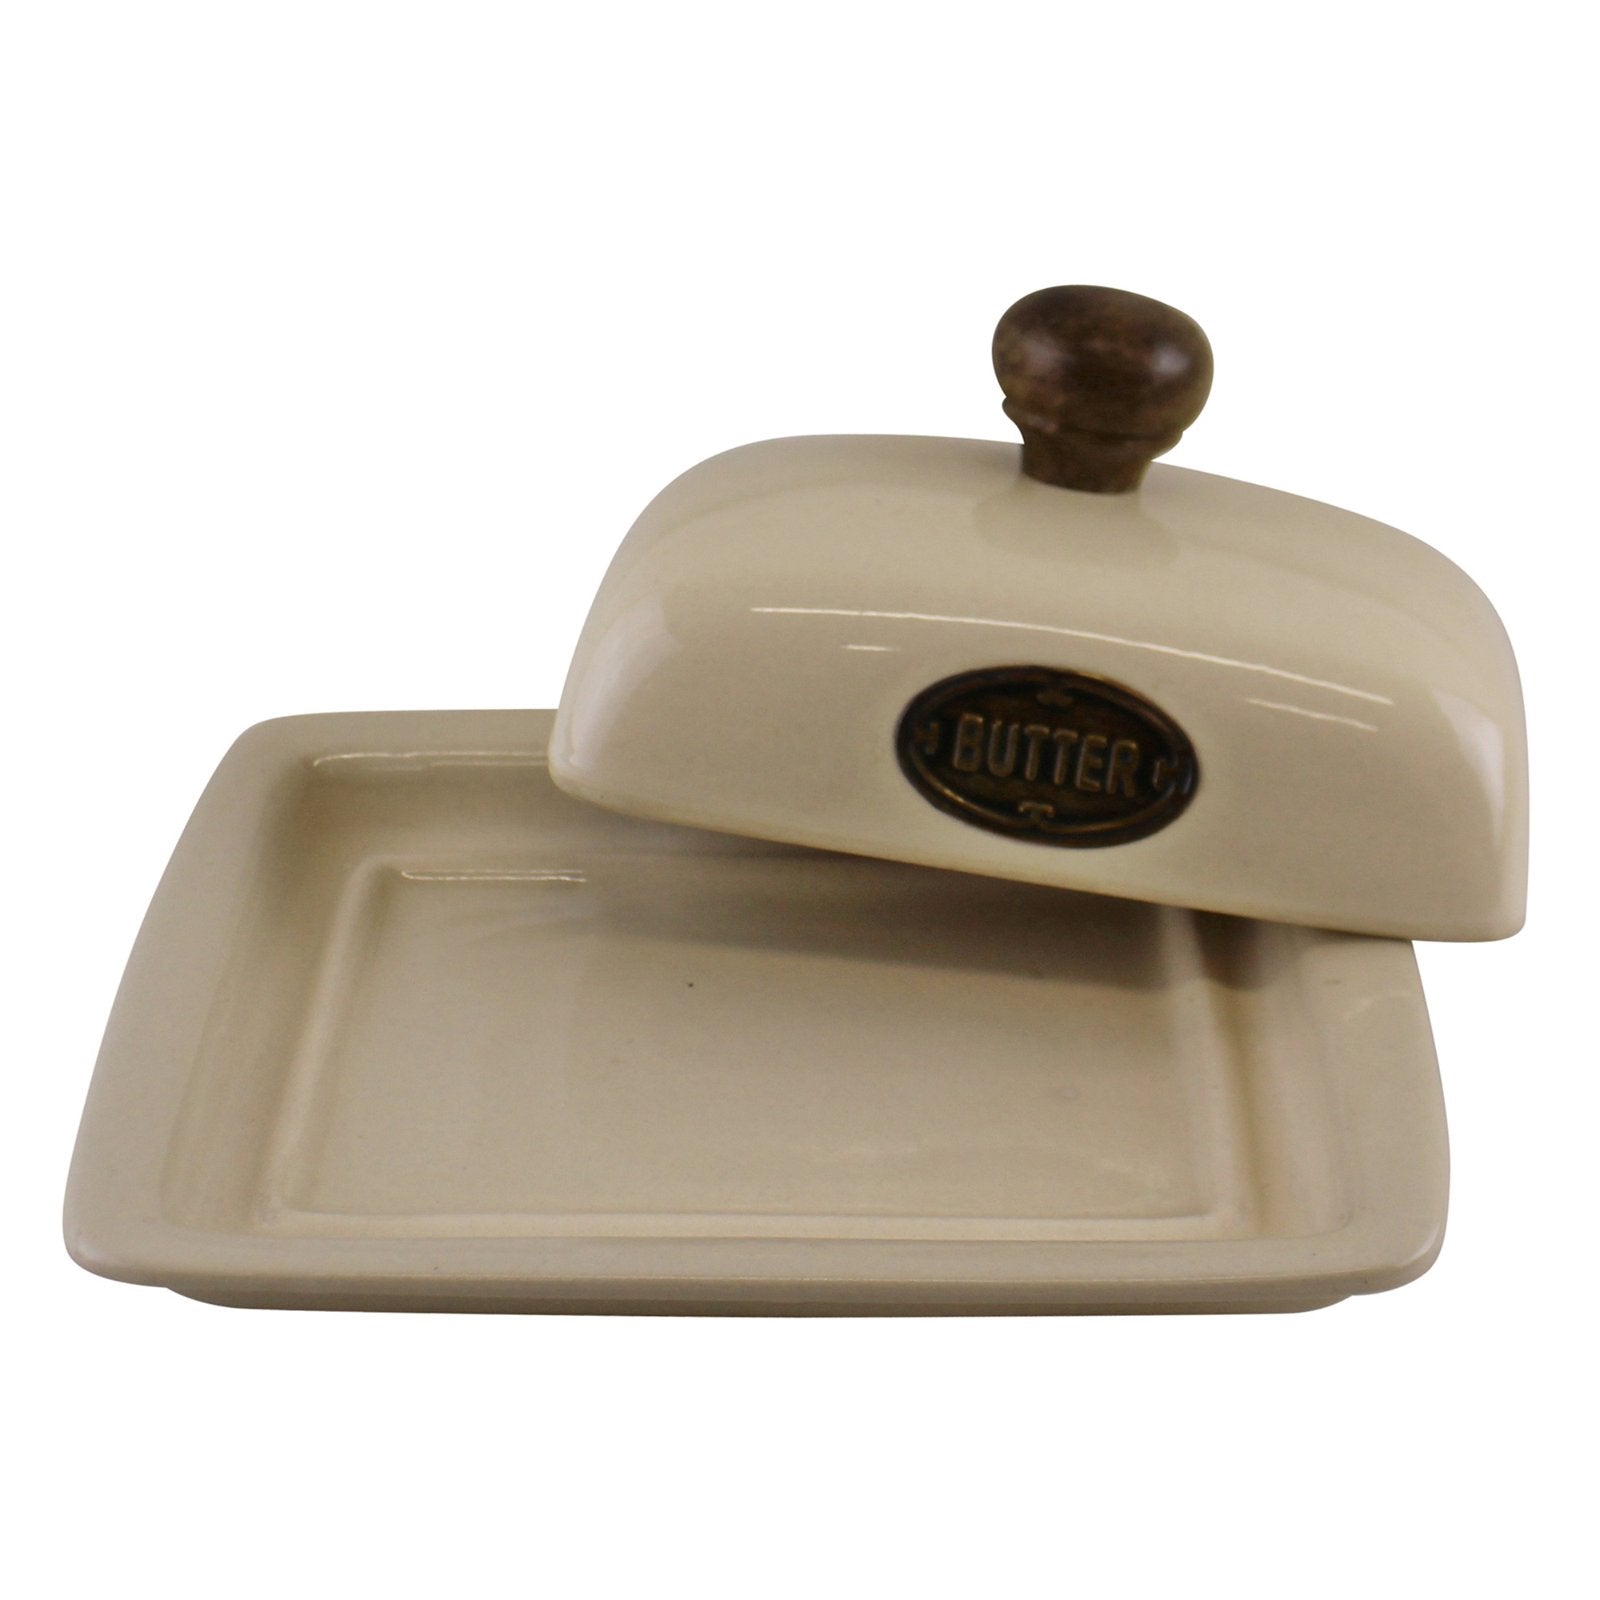 Country Cottage Cream Ceramic Butter Dish